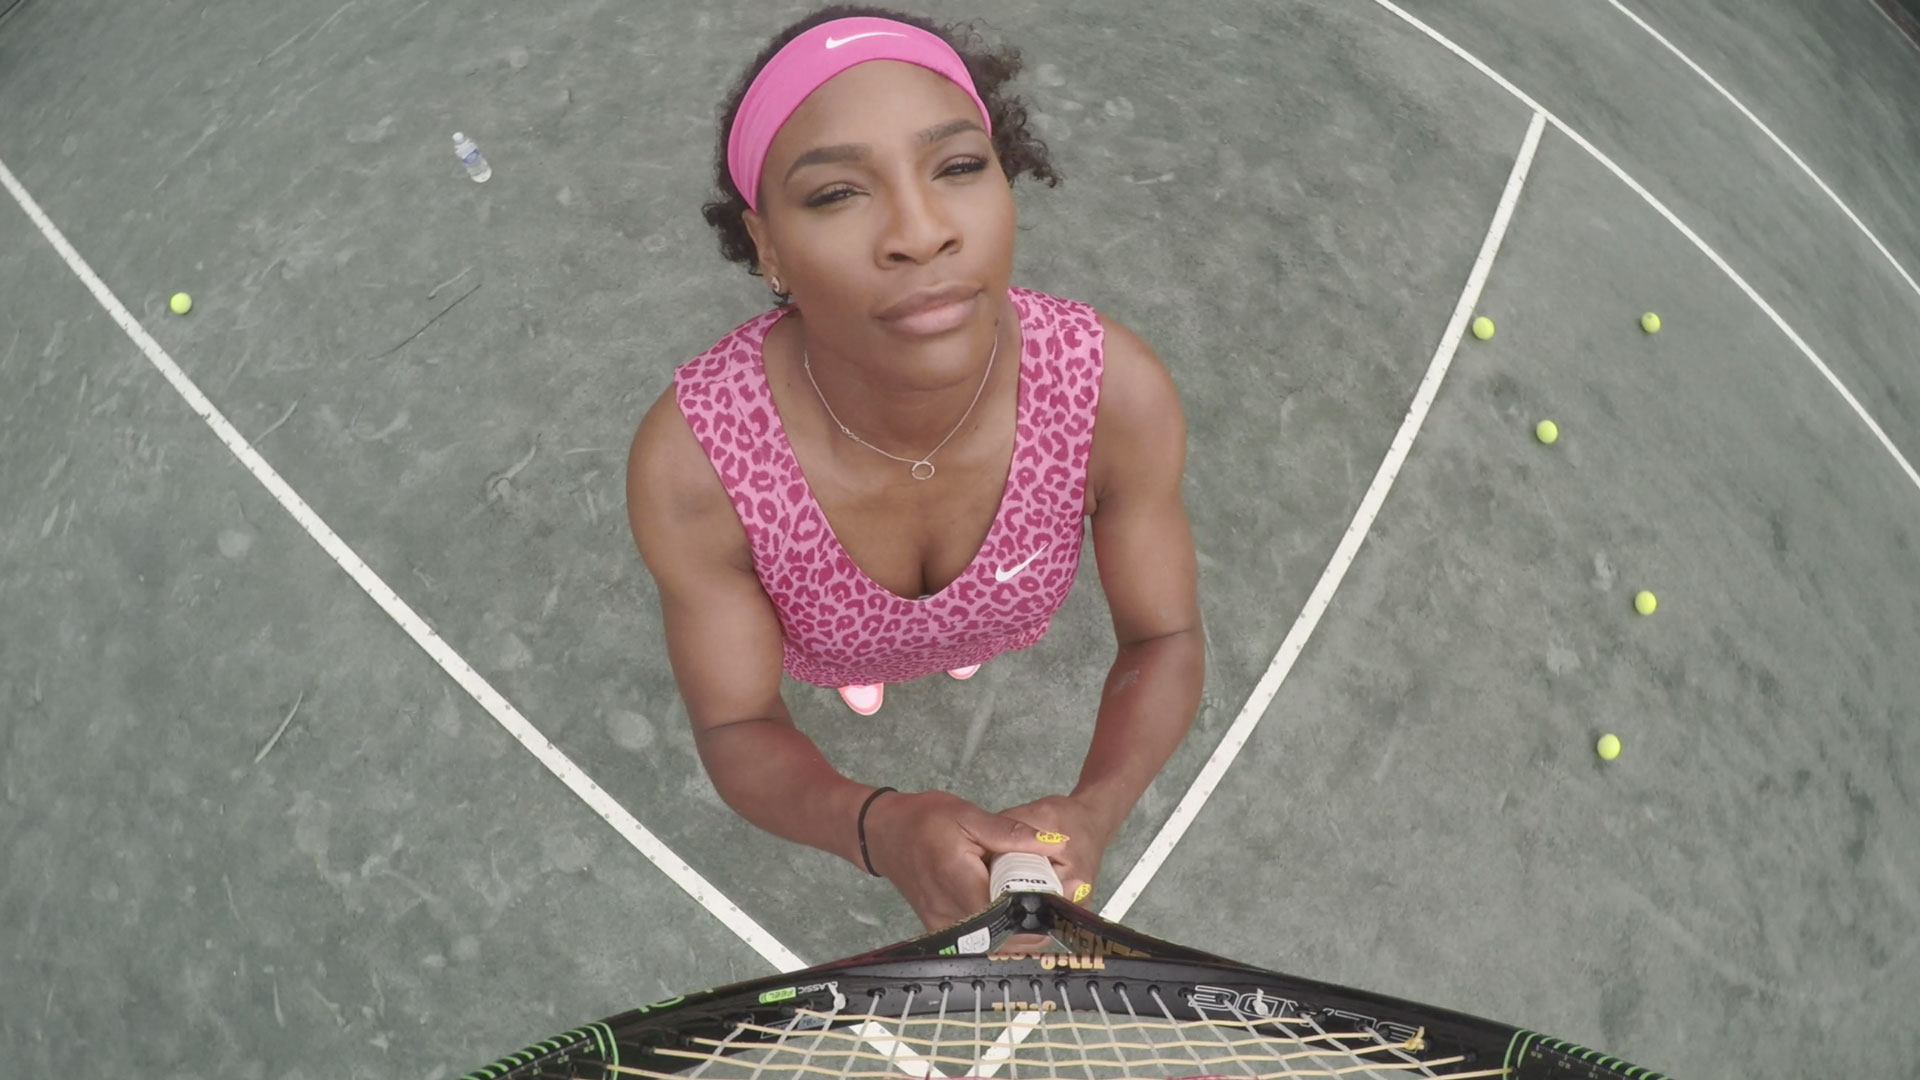 Serena Williams's Version of "7/11" Is a Grand Slam